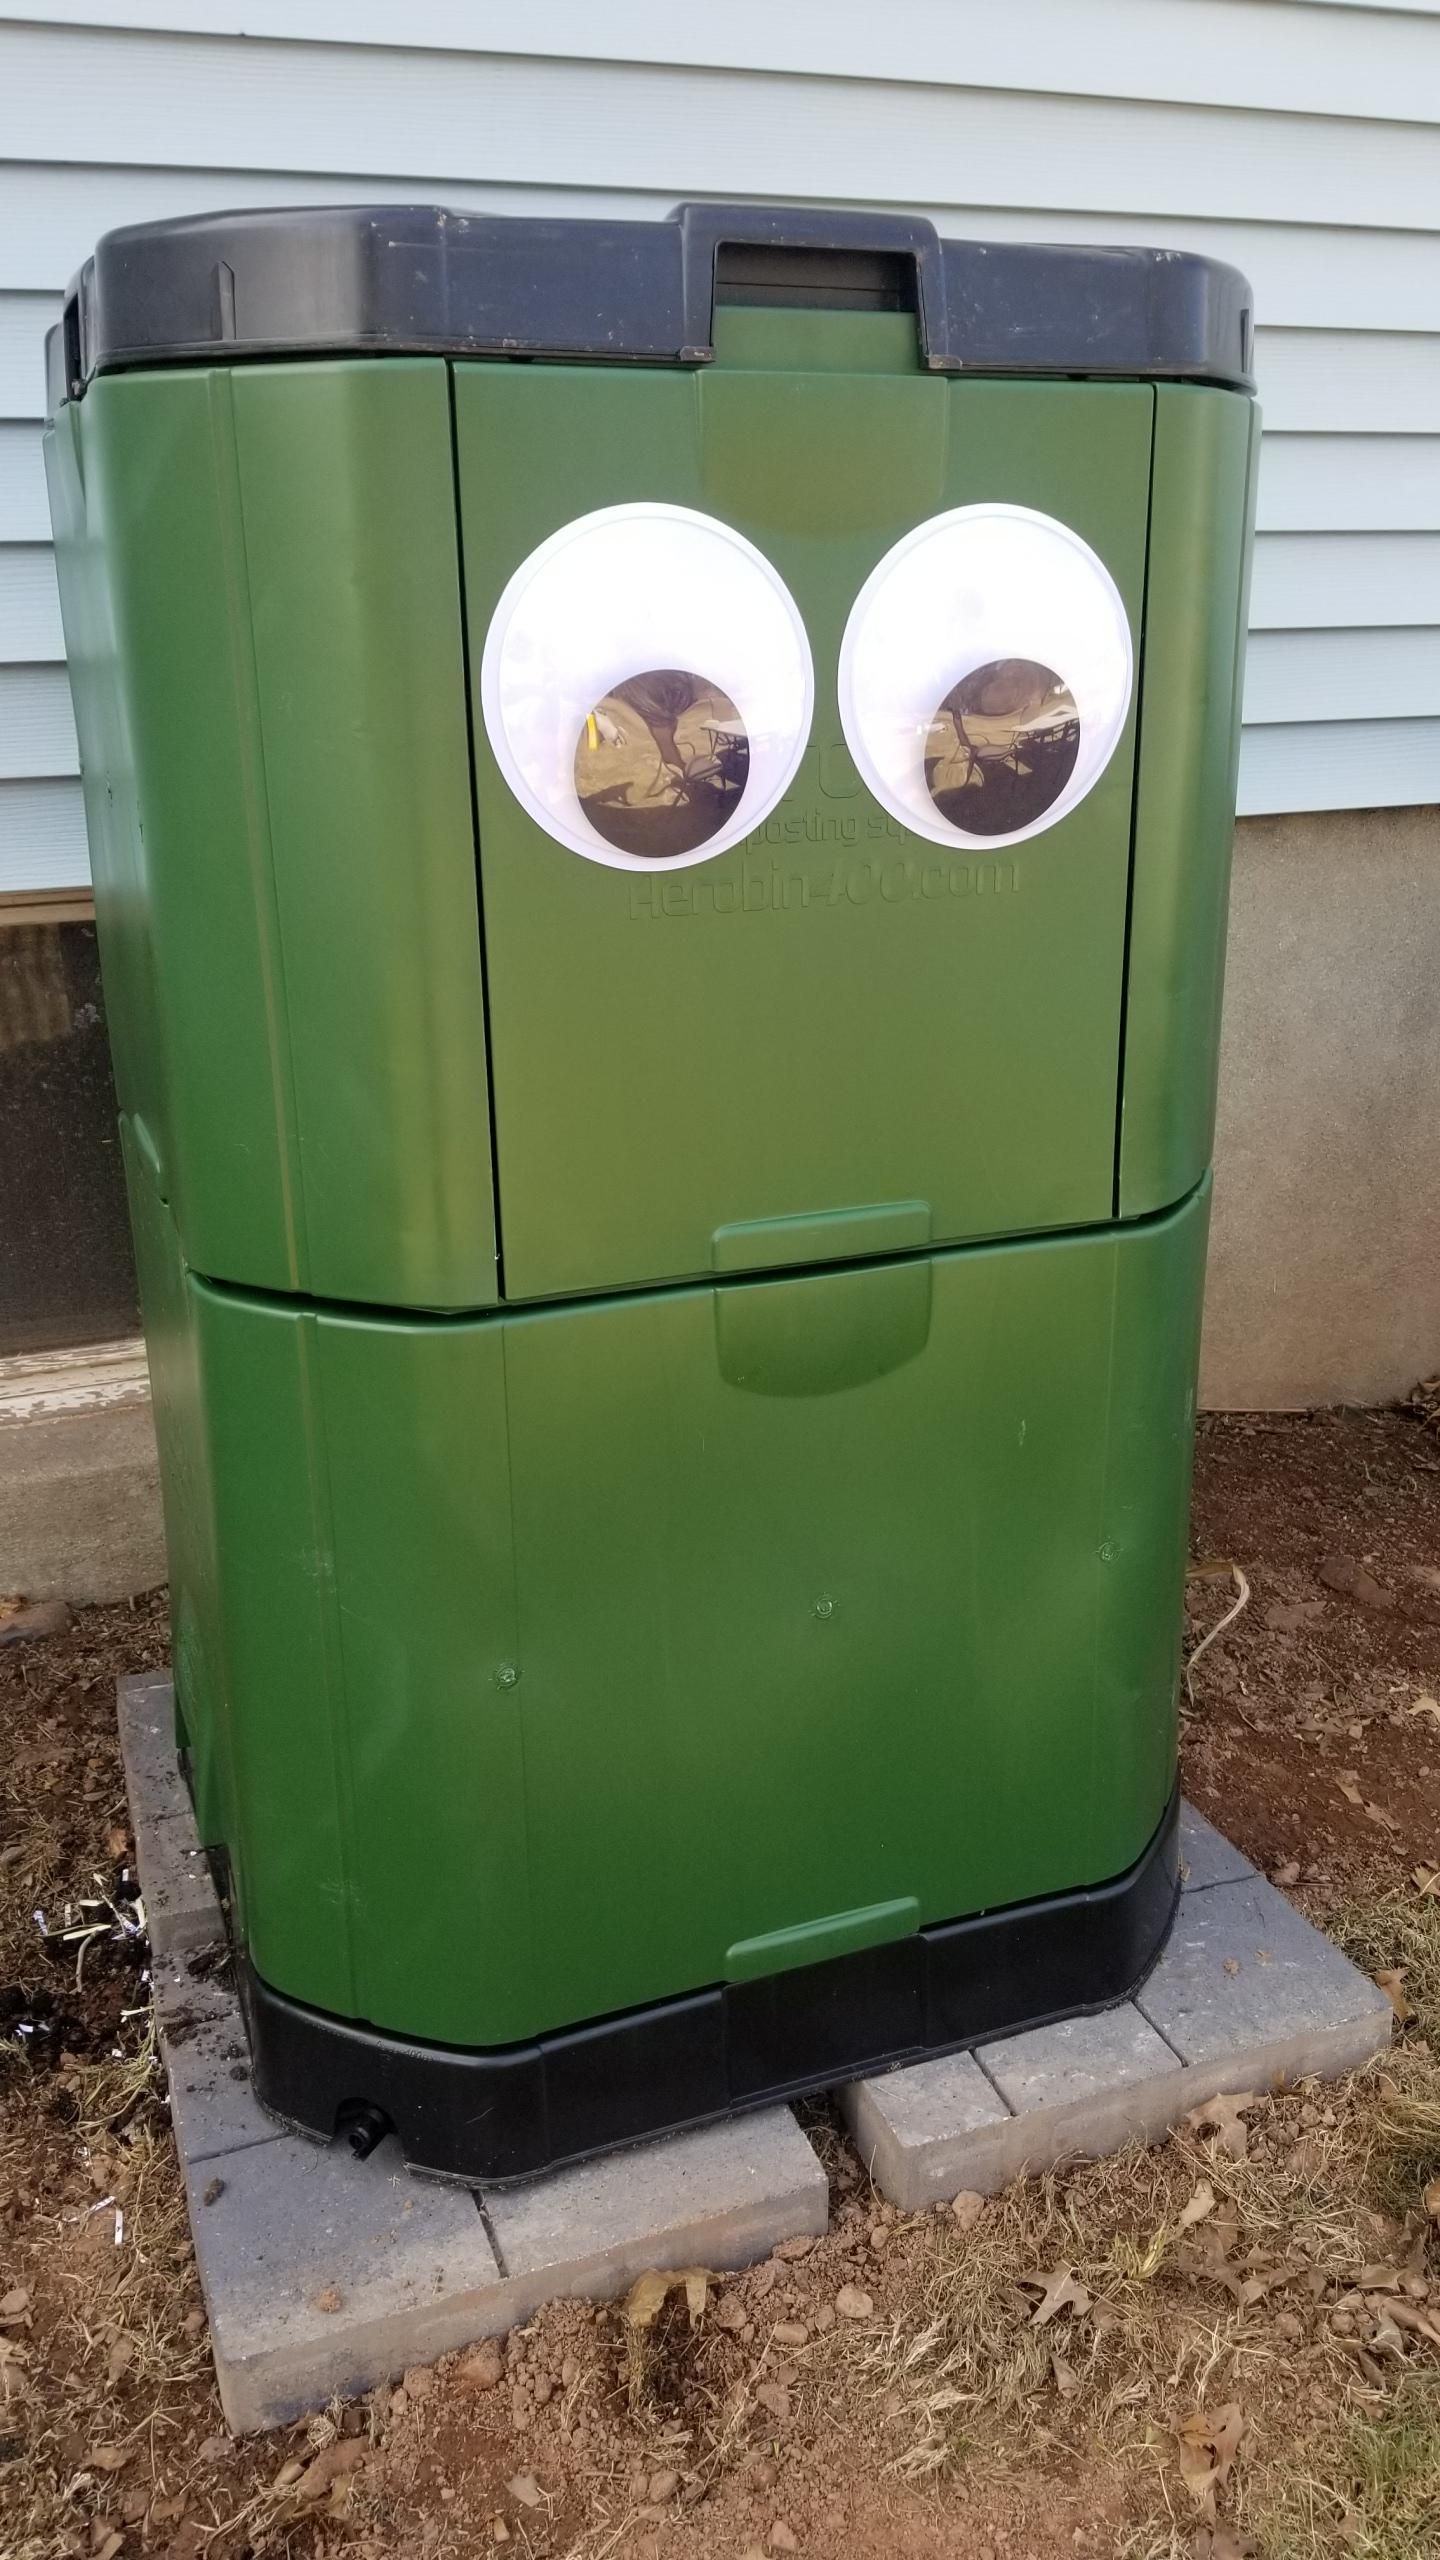 Trying to come up with a way to get my family on board for composting. Added some eyeballs and named him Oscar.